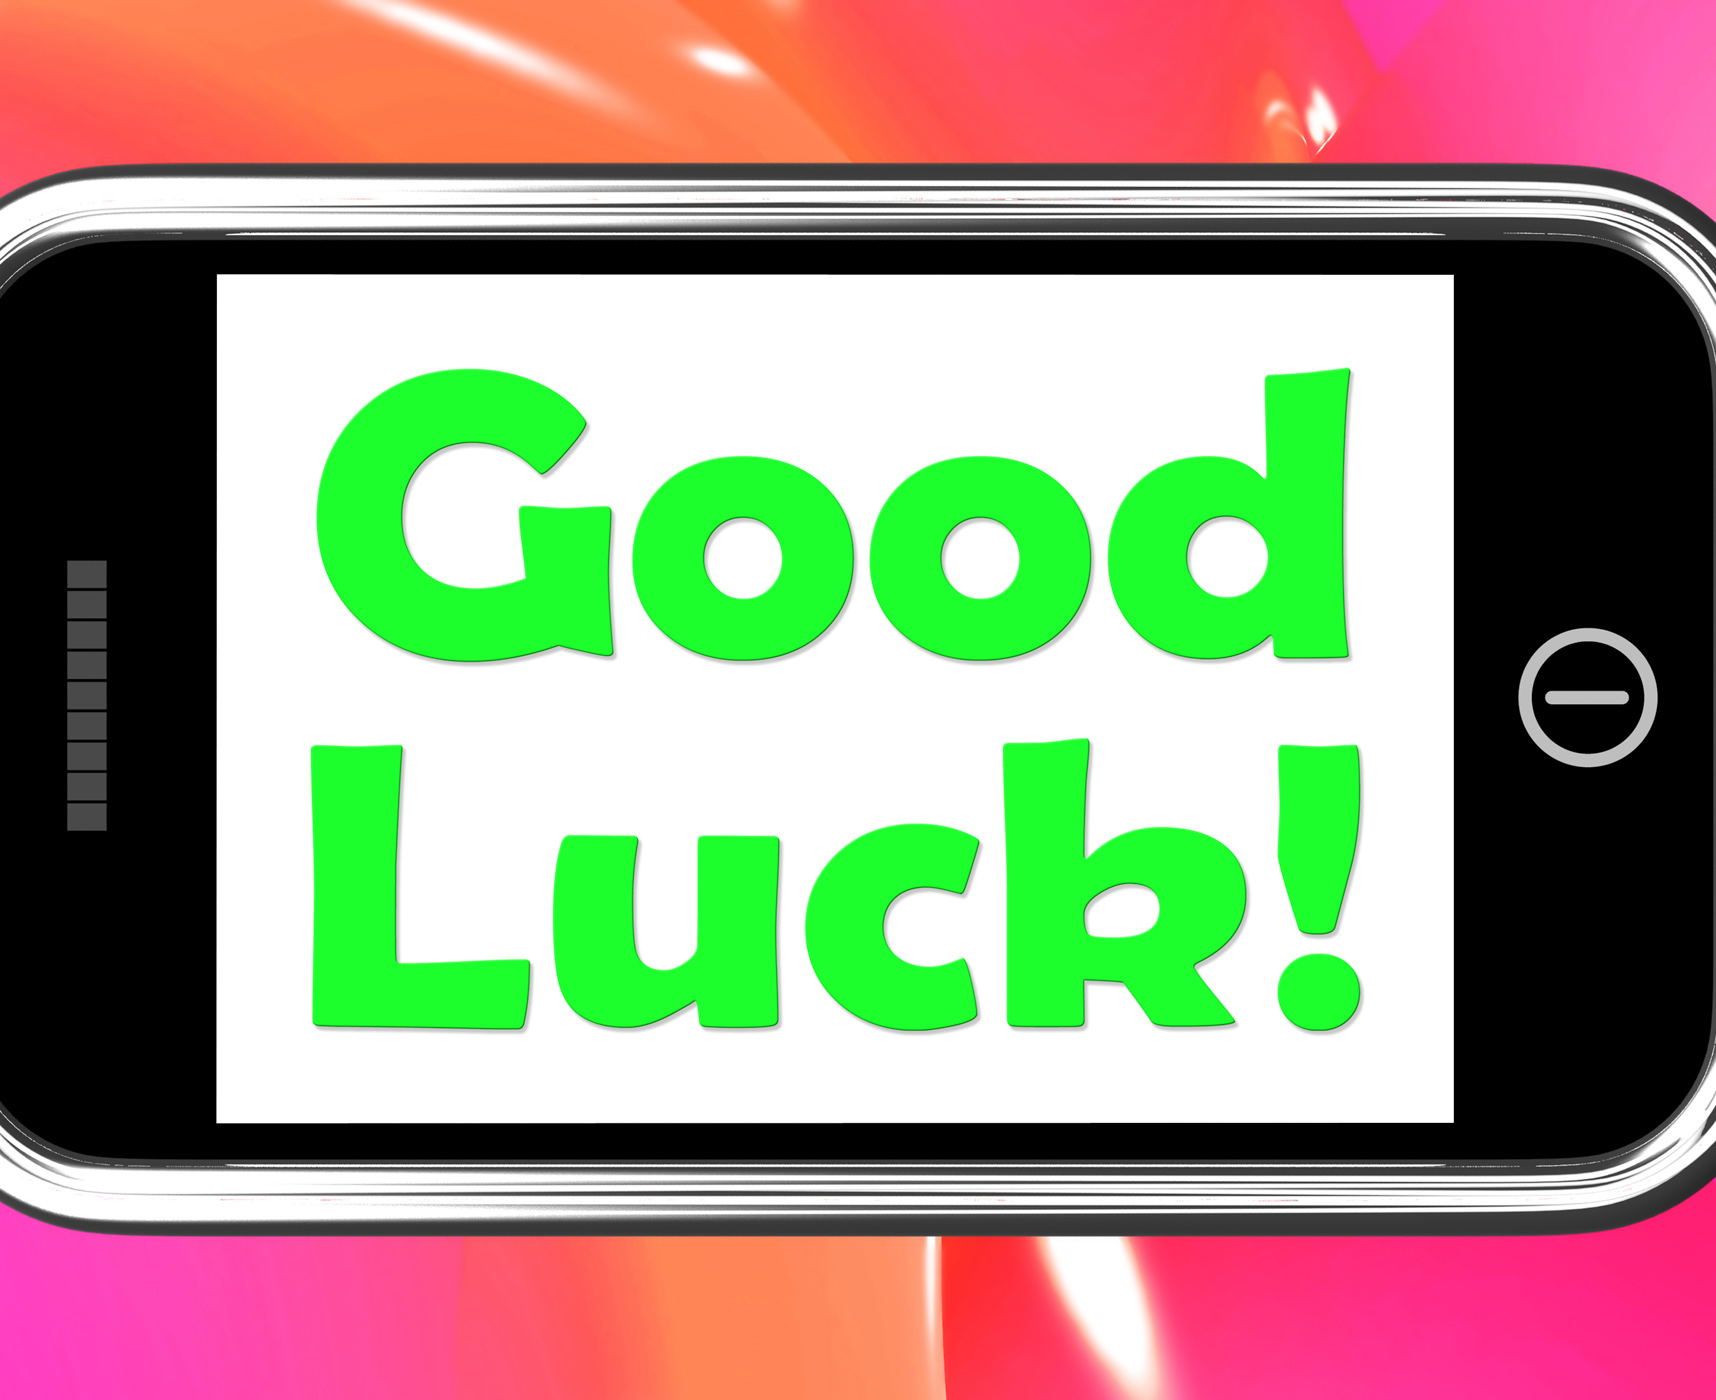 Good luck on phone shows fortune and lucky photo